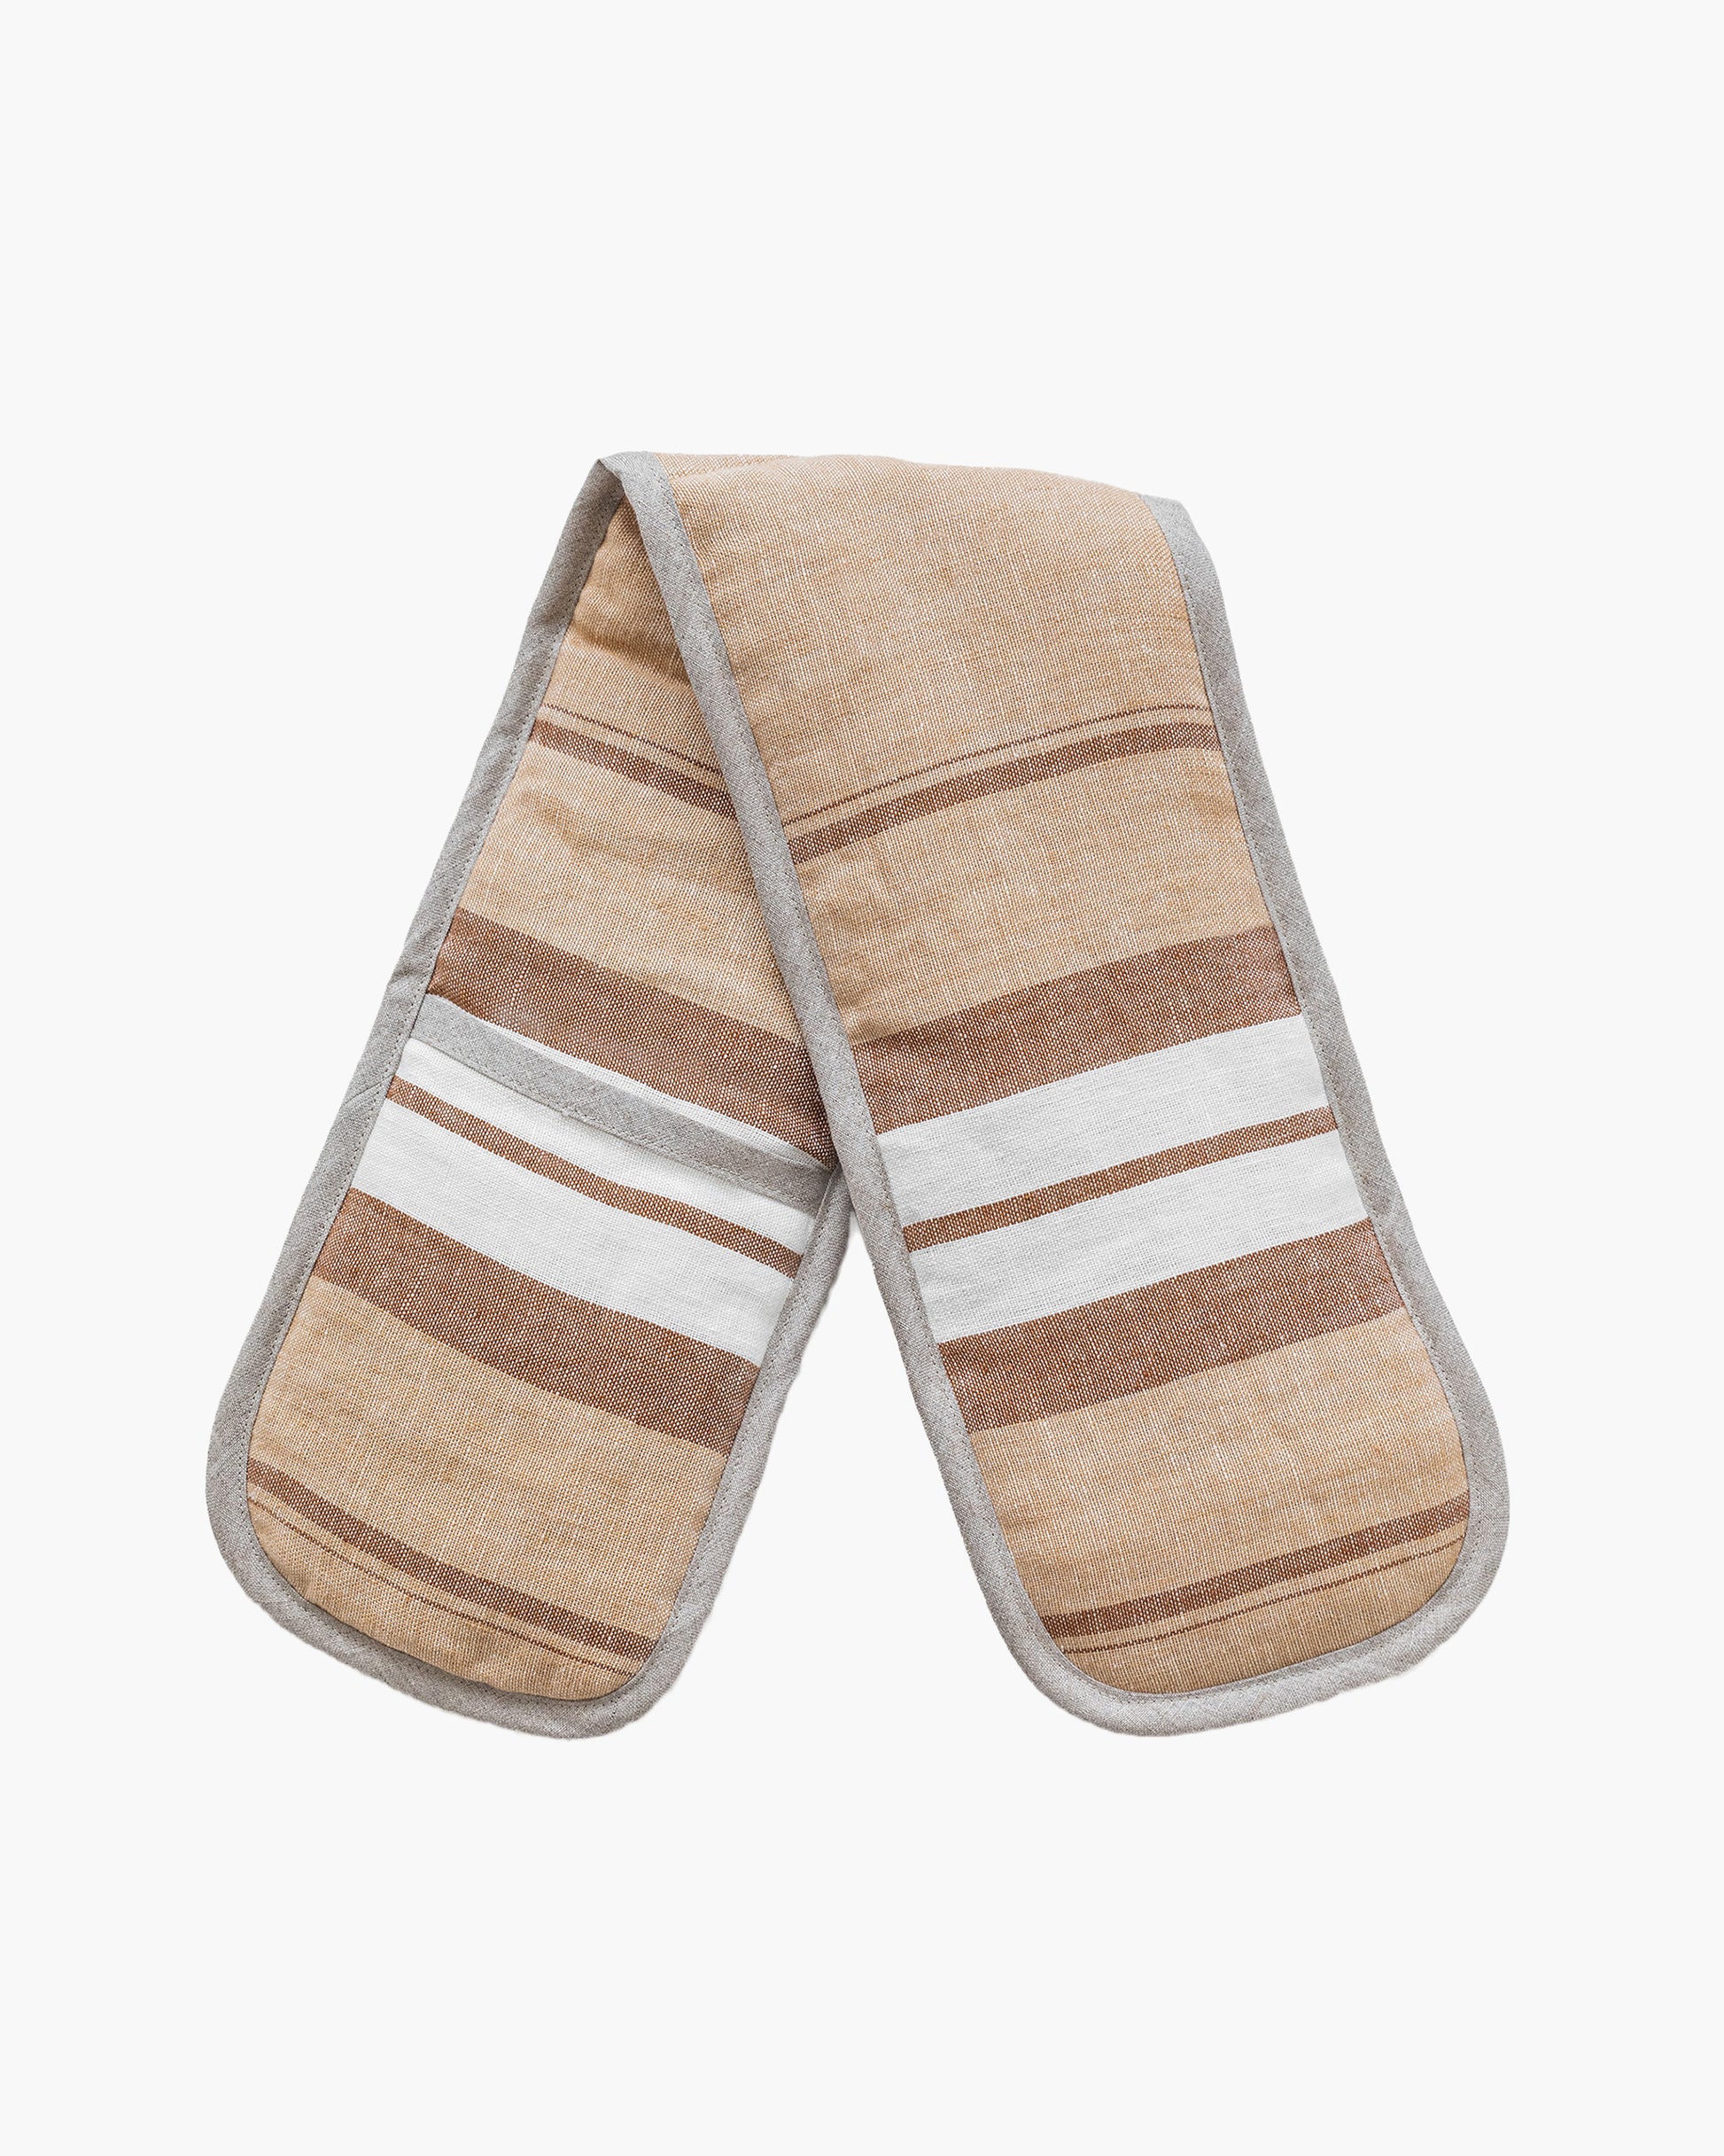 Double oven mitt (1 pcs) in French stripe - MagicLinen